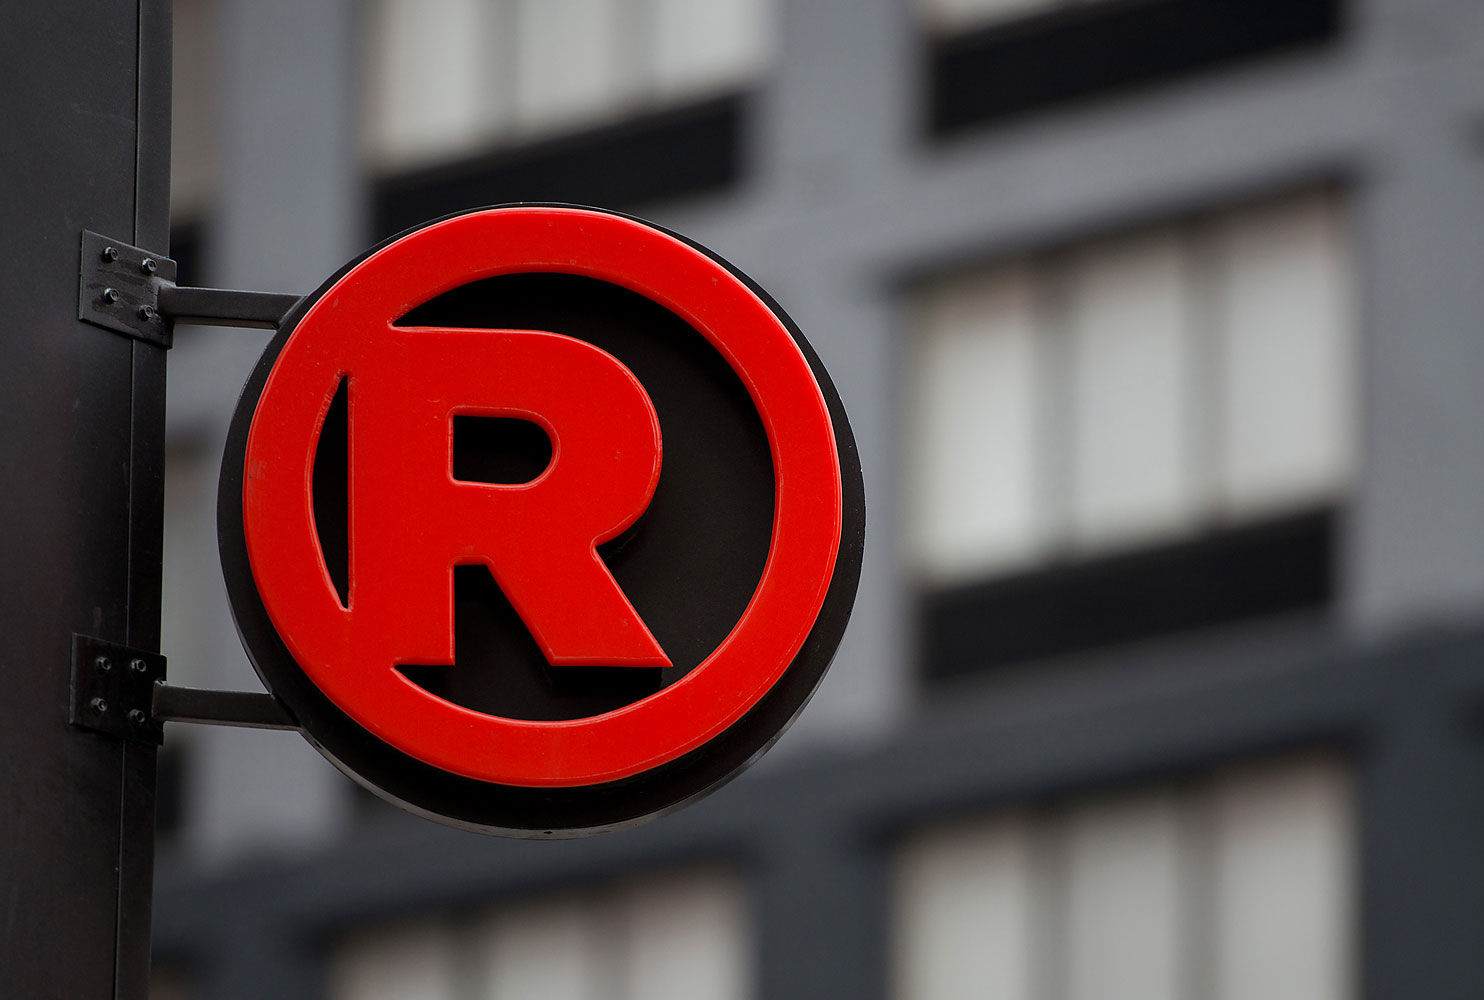 RadioShack Corp. signage is displayed outside of a store in New York, U.S., on Sunday, March 2, 2014. RadioShack Corp. is scheduled to release earnings figures on March 4. Photographer: Craig Warga/Bloomberg via Getty Images (Bloomberg&mdash;Bloomberg via Getty Images)